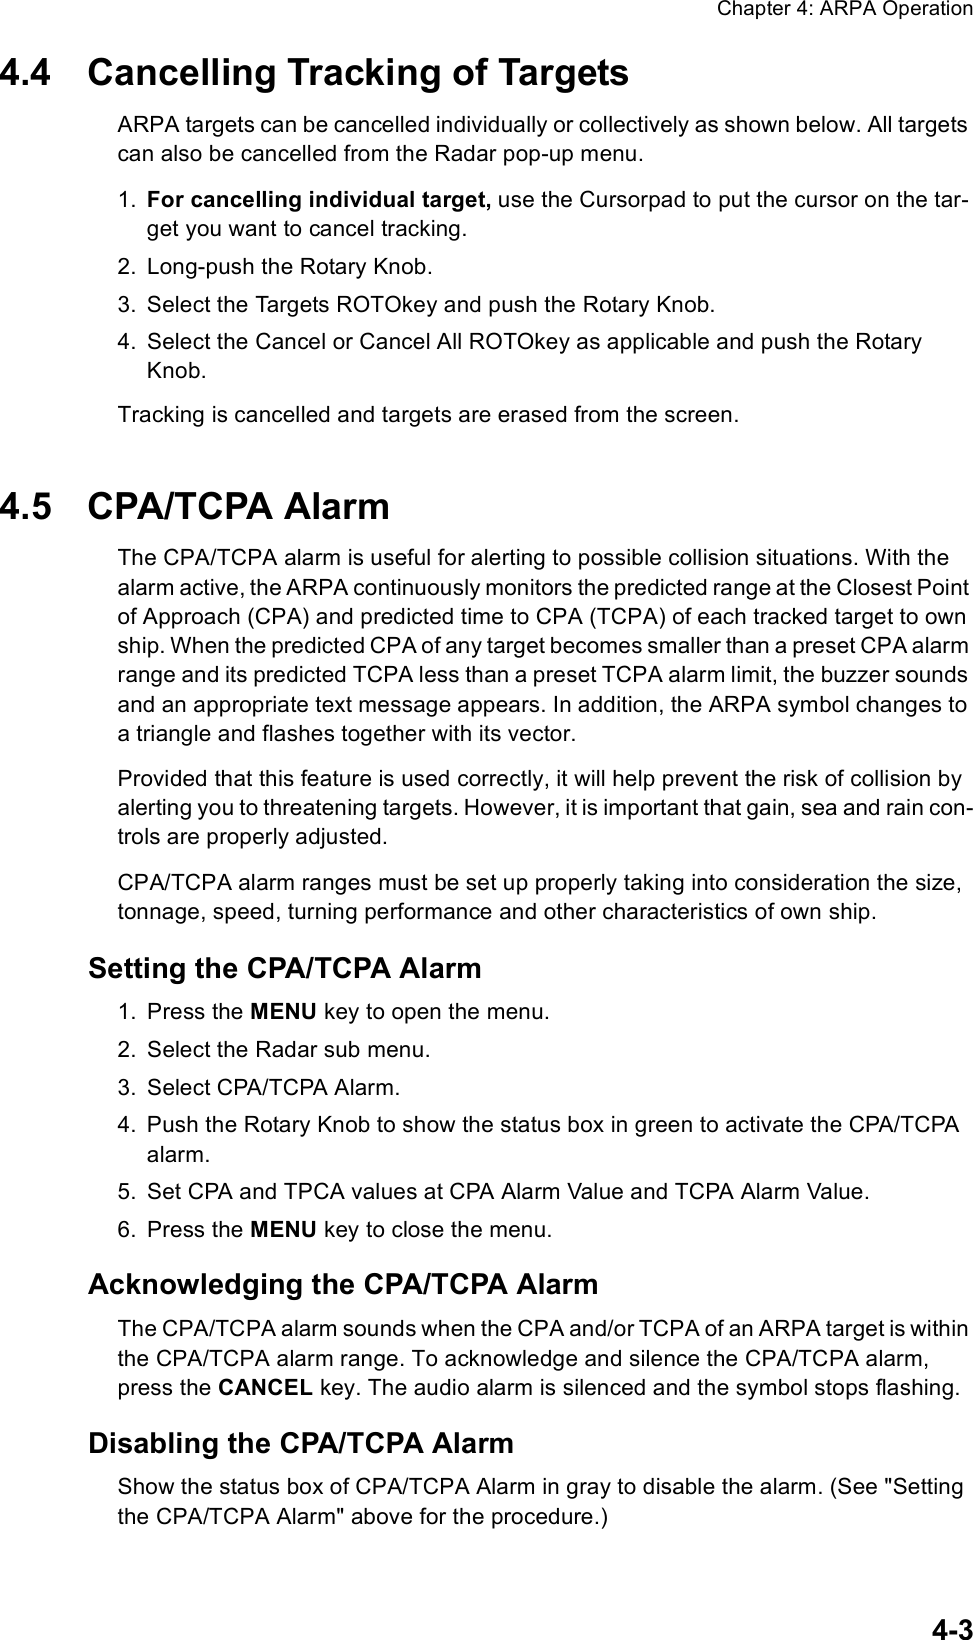 Chapter 4: ARPA Operation4-34.4 Cancelling Tracking of TargetsARPA targets can be cancelled individually or collectively as shown below. All targets can also be cancelled from the Radar pop-up menu.1. For cancelling individual target, use the Cursorpad to put the cursor on the tar-get you want to cancel tracking.2. Long-push the Rotary Knob.3. Select the Targets ROTOkey and push the Rotary Knob.4. Select the Cancel or Cancel All ROTOkey as applicable and push the Rotary Knob.Tracking is cancelled and targets are erased from the screen.4.5 CPA/TCPA AlarmThe CPA/TCPA alarm is useful for alerting to possible collision situations. With the alarm active, the ARPA continuously monitors the predicted range at the Closest Point of Approach (CPA) and predicted time to CPA (TCPA) of each tracked target to own ship. When the predicted CPA of any target becomes smaller than a preset CPA alarm range and its predicted TCPA less than a preset TCPA alarm limit, the buzzer sounds and an appropriate text message appears. In addition, the ARPA symbol changes to a triangle and flashes together with its vector.Provided that this feature is used correctly, it will help prevent the risk of collision by alerting you to threatening targets. However, it is important that gain, sea and rain con-trols are properly adjusted. CPA/TCPA alarm ranges must be set up properly taking into consideration the size, tonnage, speed, turning performance and other characteristics of own ship.Setting the CPA/TCPA Alarm1. Press the MENU key to open the menu.2. Select the Radar sub menu.3. Select CPA/TCPA Alarm.4. Push the Rotary Knob to show the status box in green to activate the CPA/TCPA alarm.5. Set CPA and TPCA values at CPA Alarm Value and TCPA Alarm Value.6. Press the MENU key to close the menu.Acknowledging the CPA/TCPA AlarmThe CPA/TCPA alarm sounds when the CPA and/or TCPA of an ARPA target is within the CPA/TCPA alarm range. To acknowledge and silence the CPA/TCPA alarm, press the CANCEL key. The audio alarm is silenced and the symbol stops flashing.Disabling the CPA/TCPA AlarmShow the status box of CPA/TCPA Alarm in gray to disable the alarm. (See &quot;Setting the CPA/TCPA Alarm&quot; above for the procedure.)